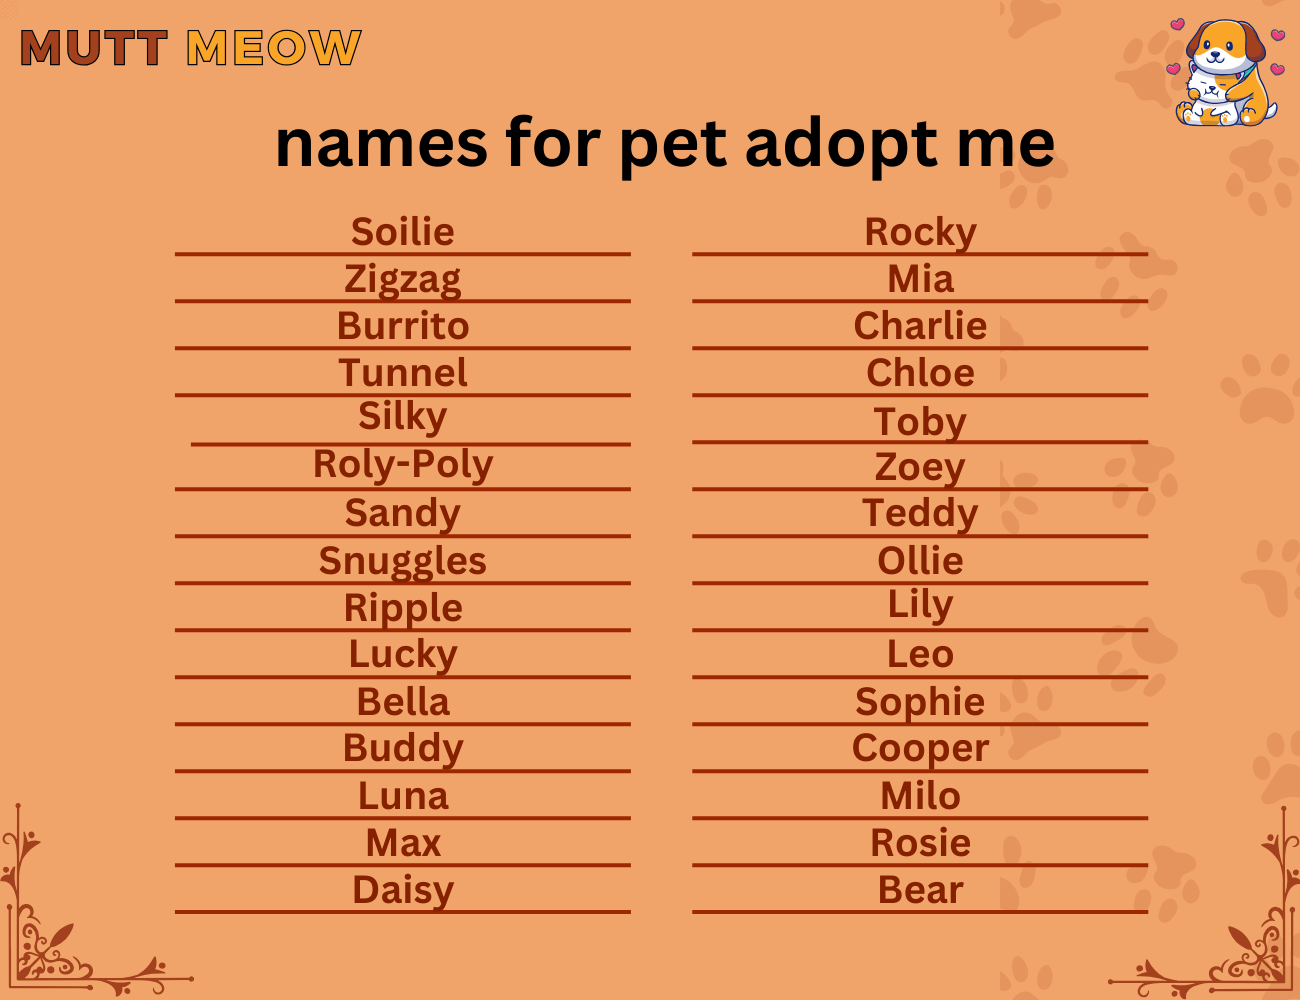 Names For Pets Adopt Me - Mutt Meow